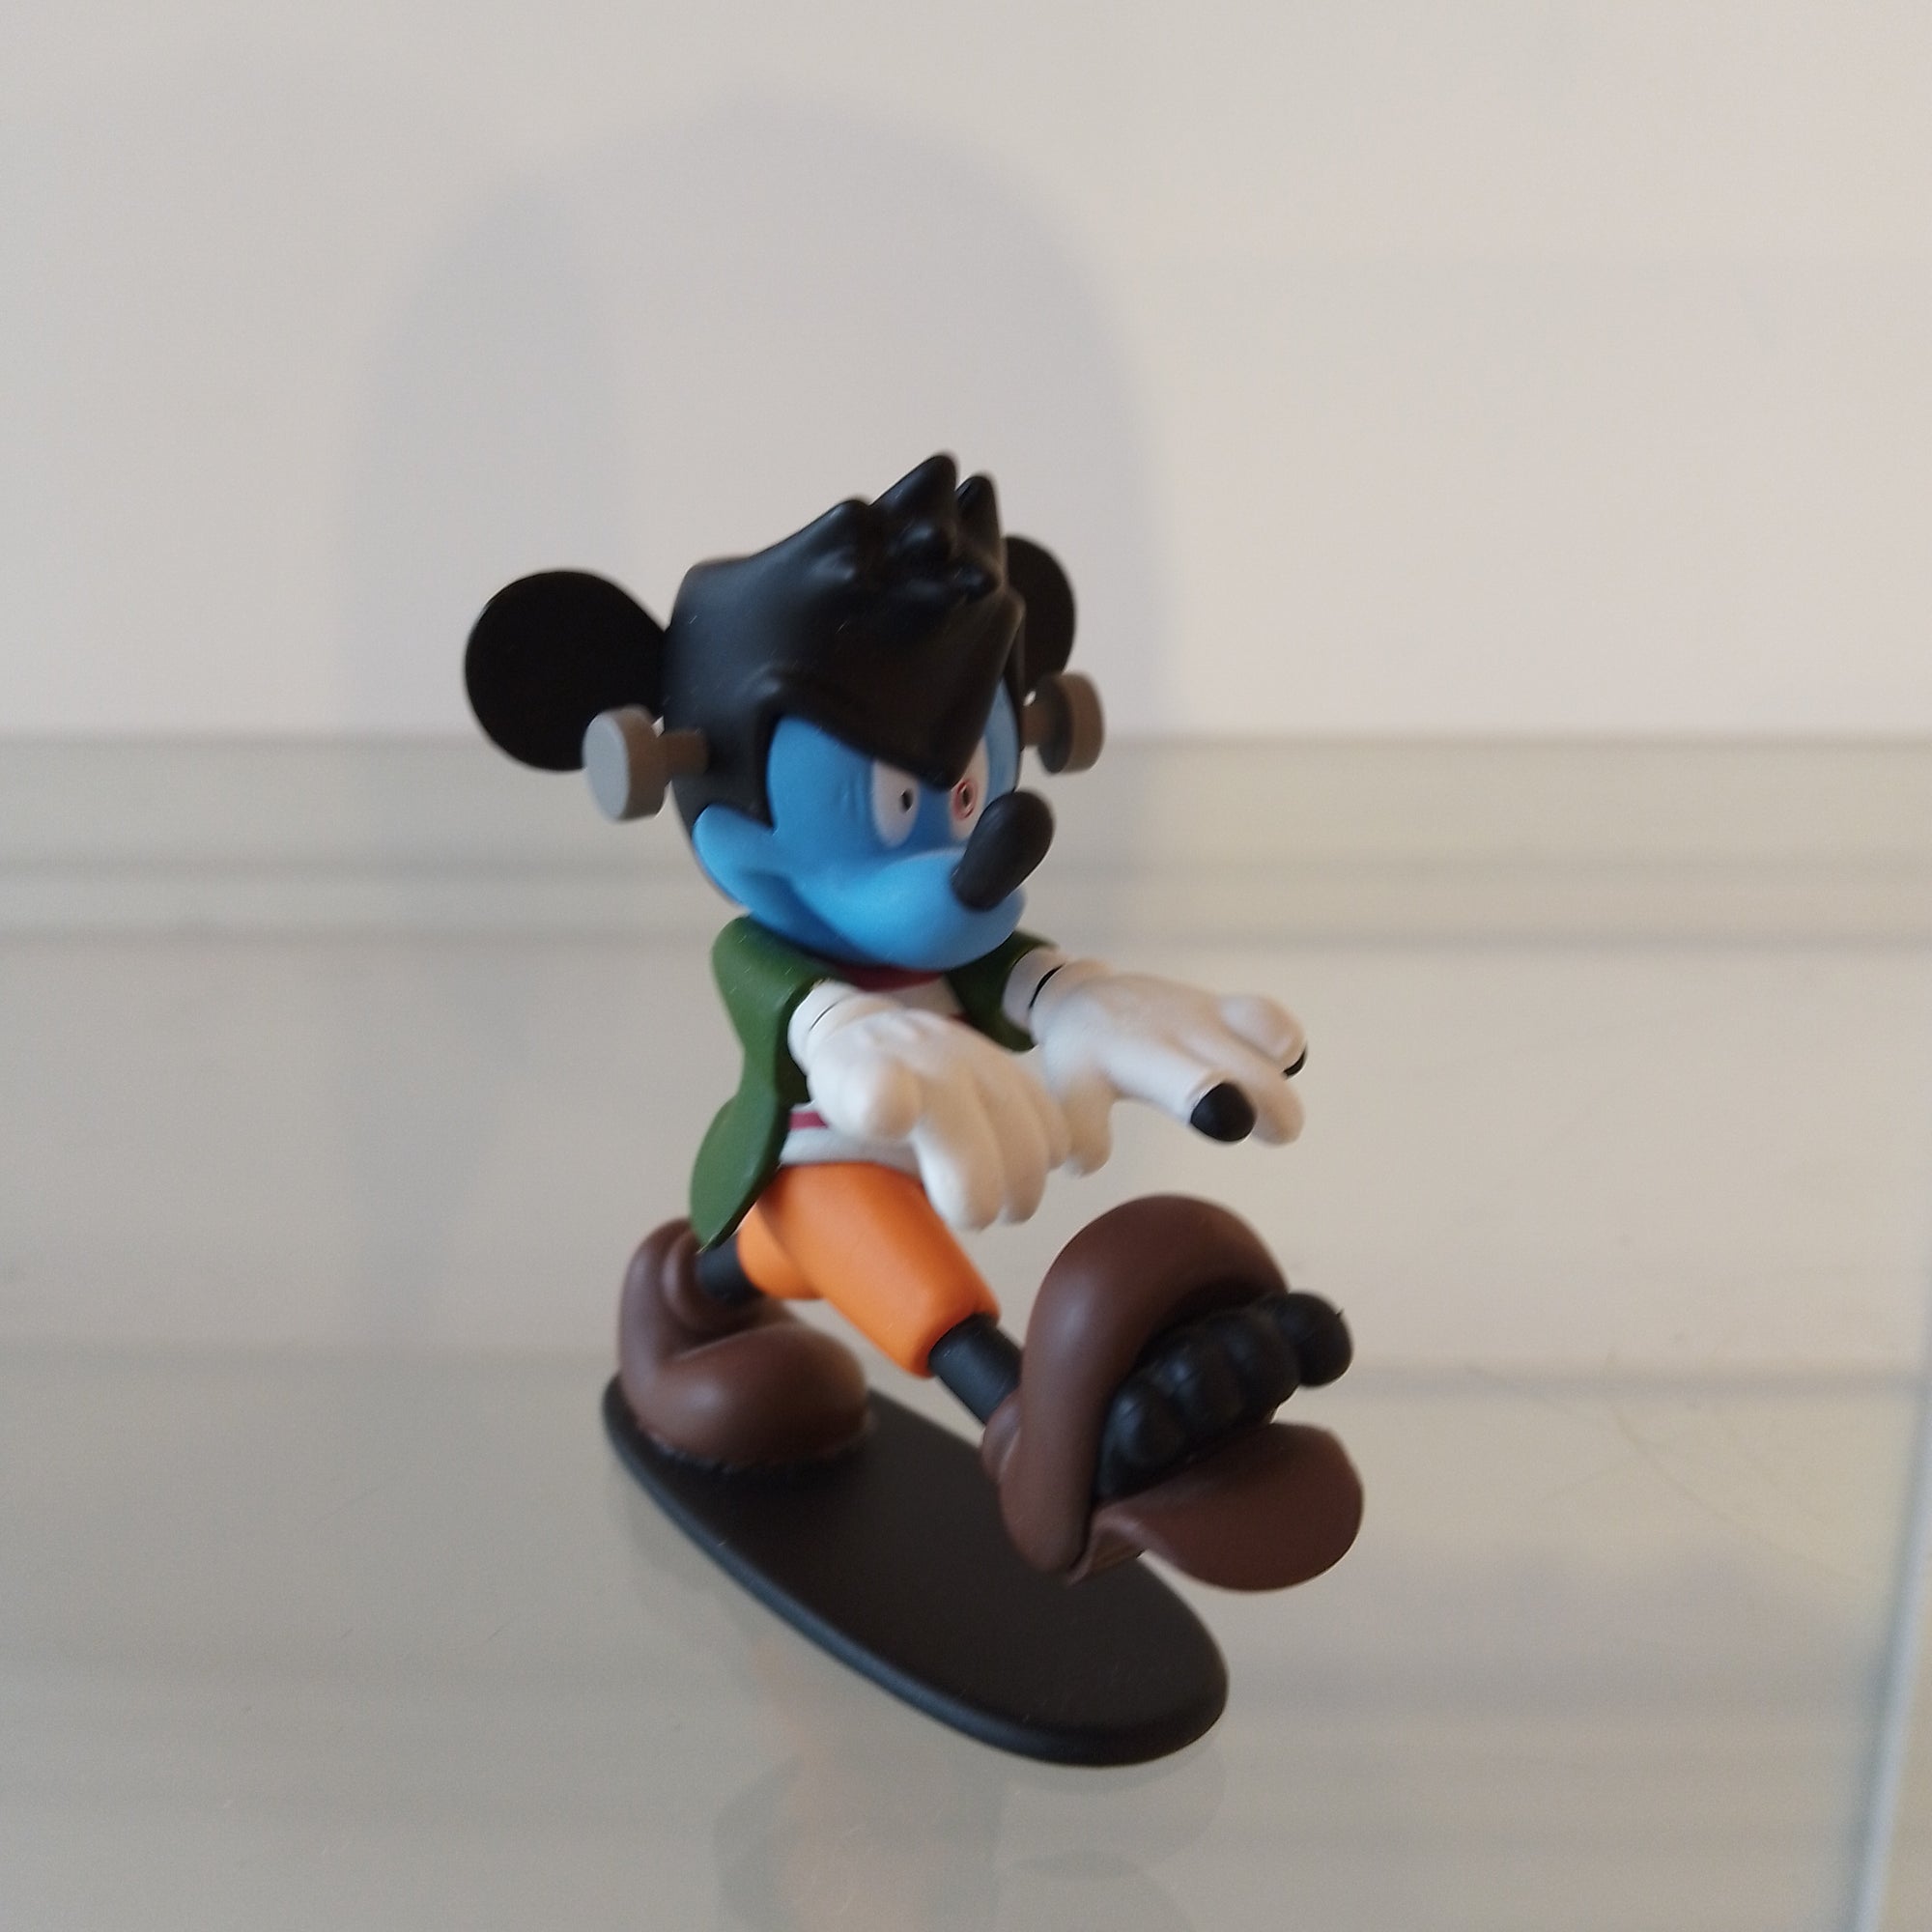 Throw Mickey Mouse VCD by Glmab x Medicom Toy - Mindzai Toy Shop